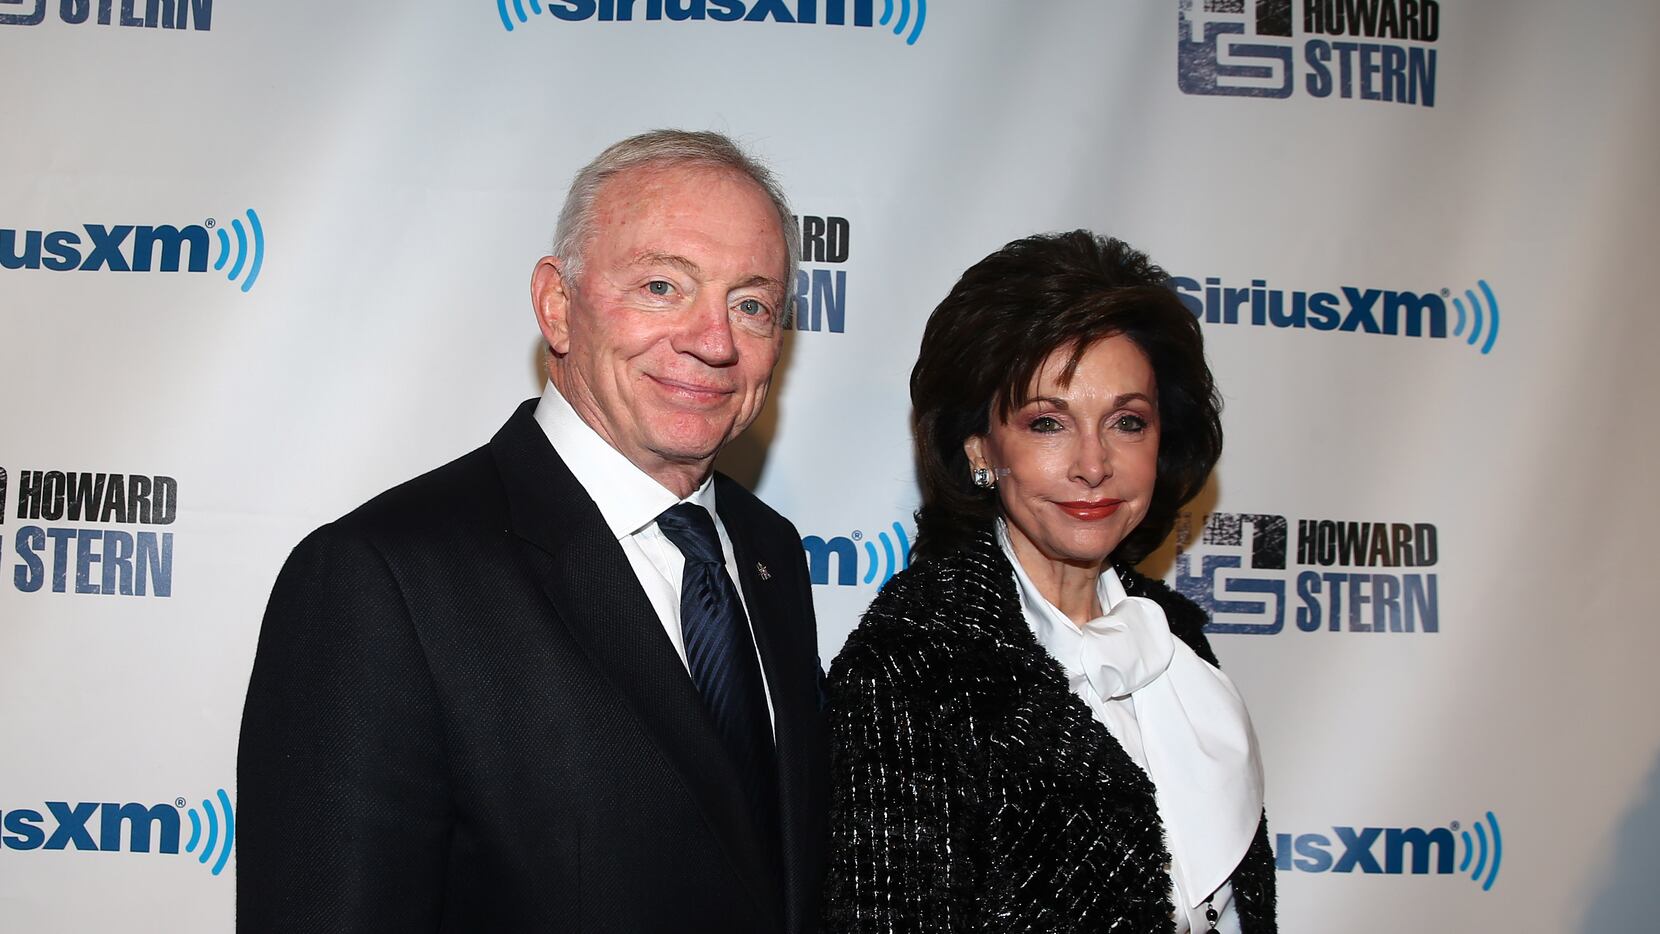 What the Dallas Cowboys' Jerry Jones could have learned from his